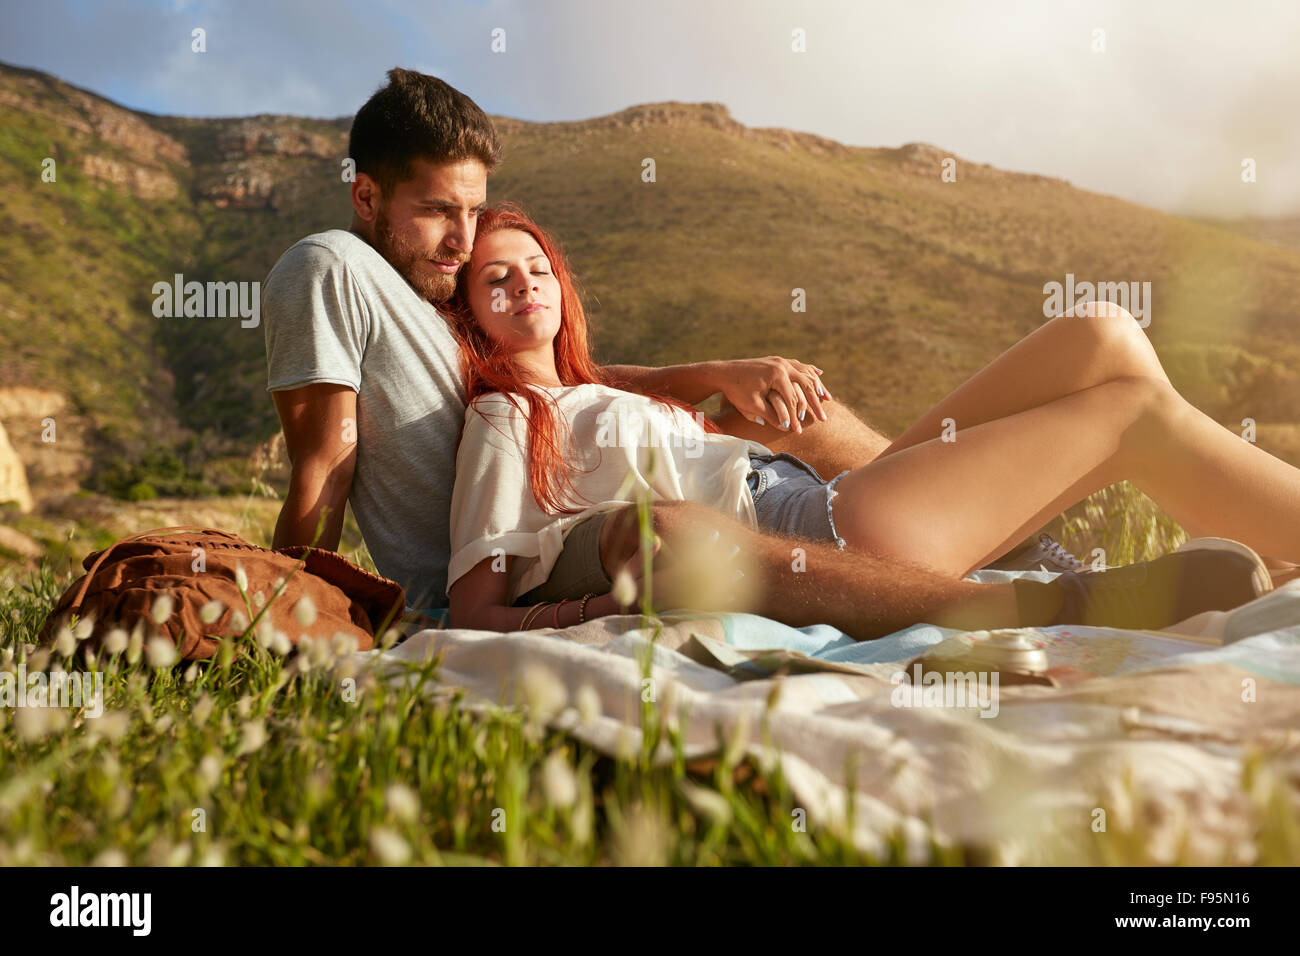 Portrait of loving young couple relaxing on summer picnic. Two young people on a mountain sitting together relaxing. Stock Photo